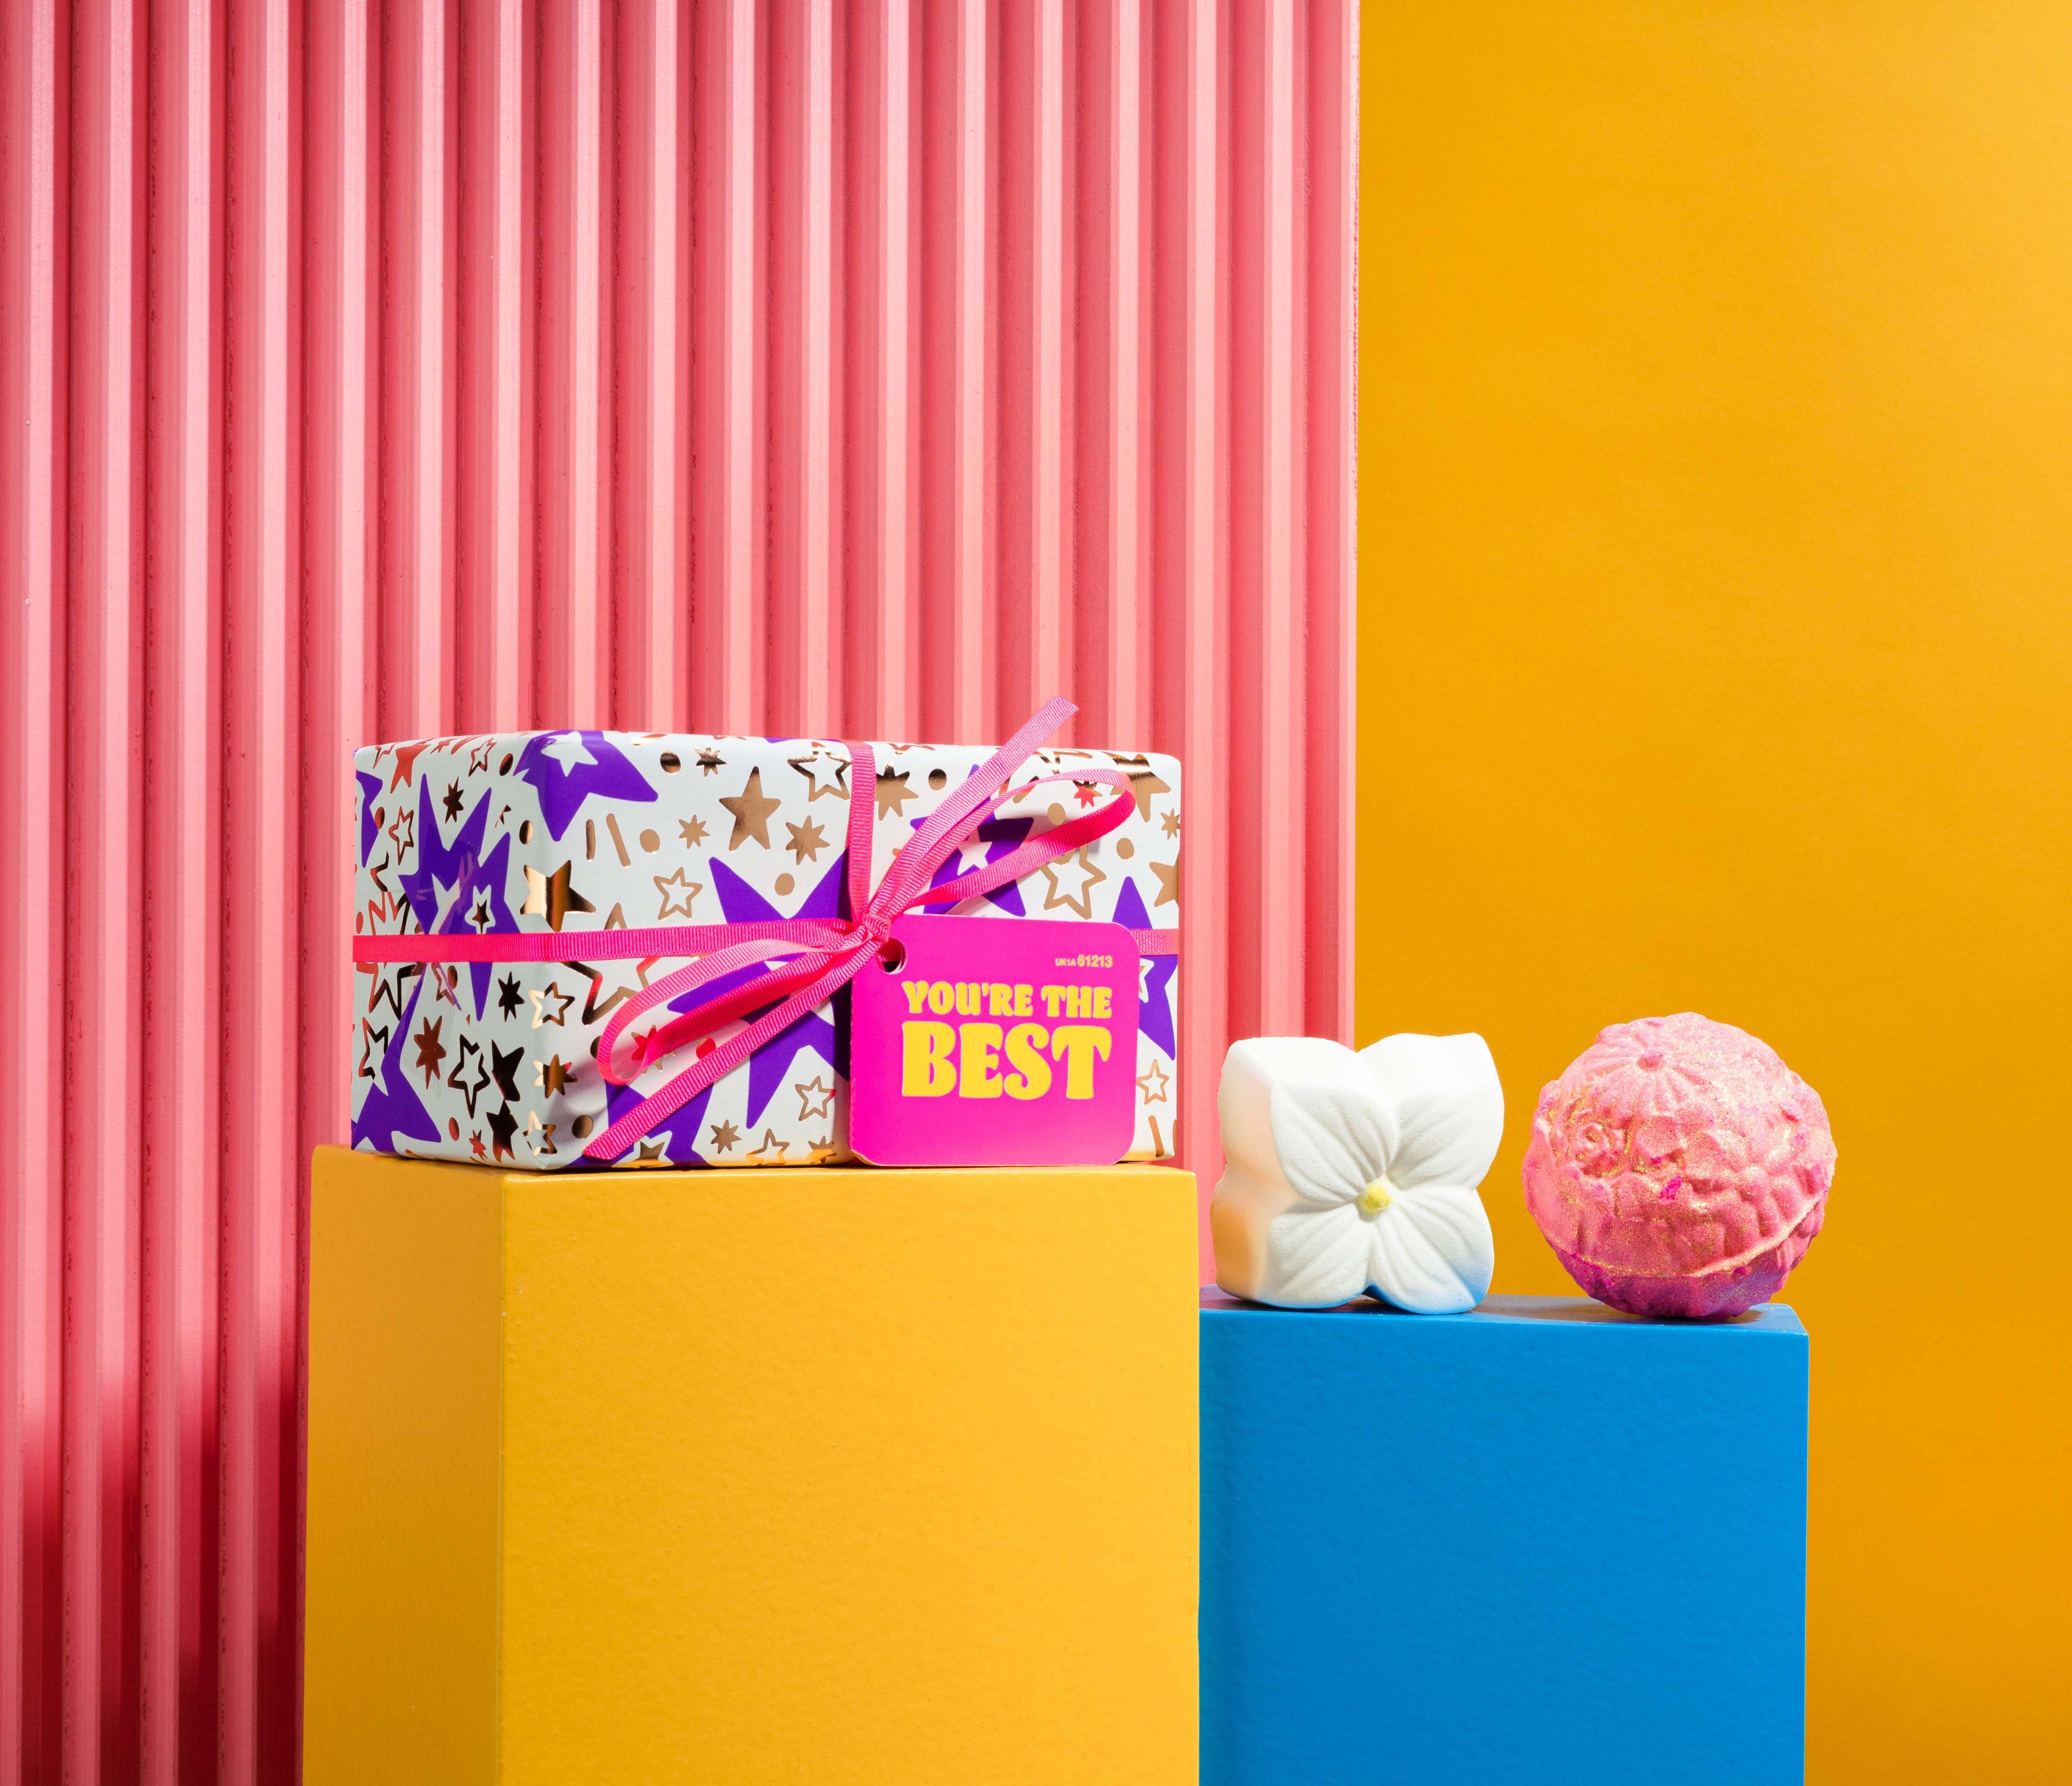 You're The Best, in front of a pink and yellow background, surrounded by its products on blue and yellow plinths. 